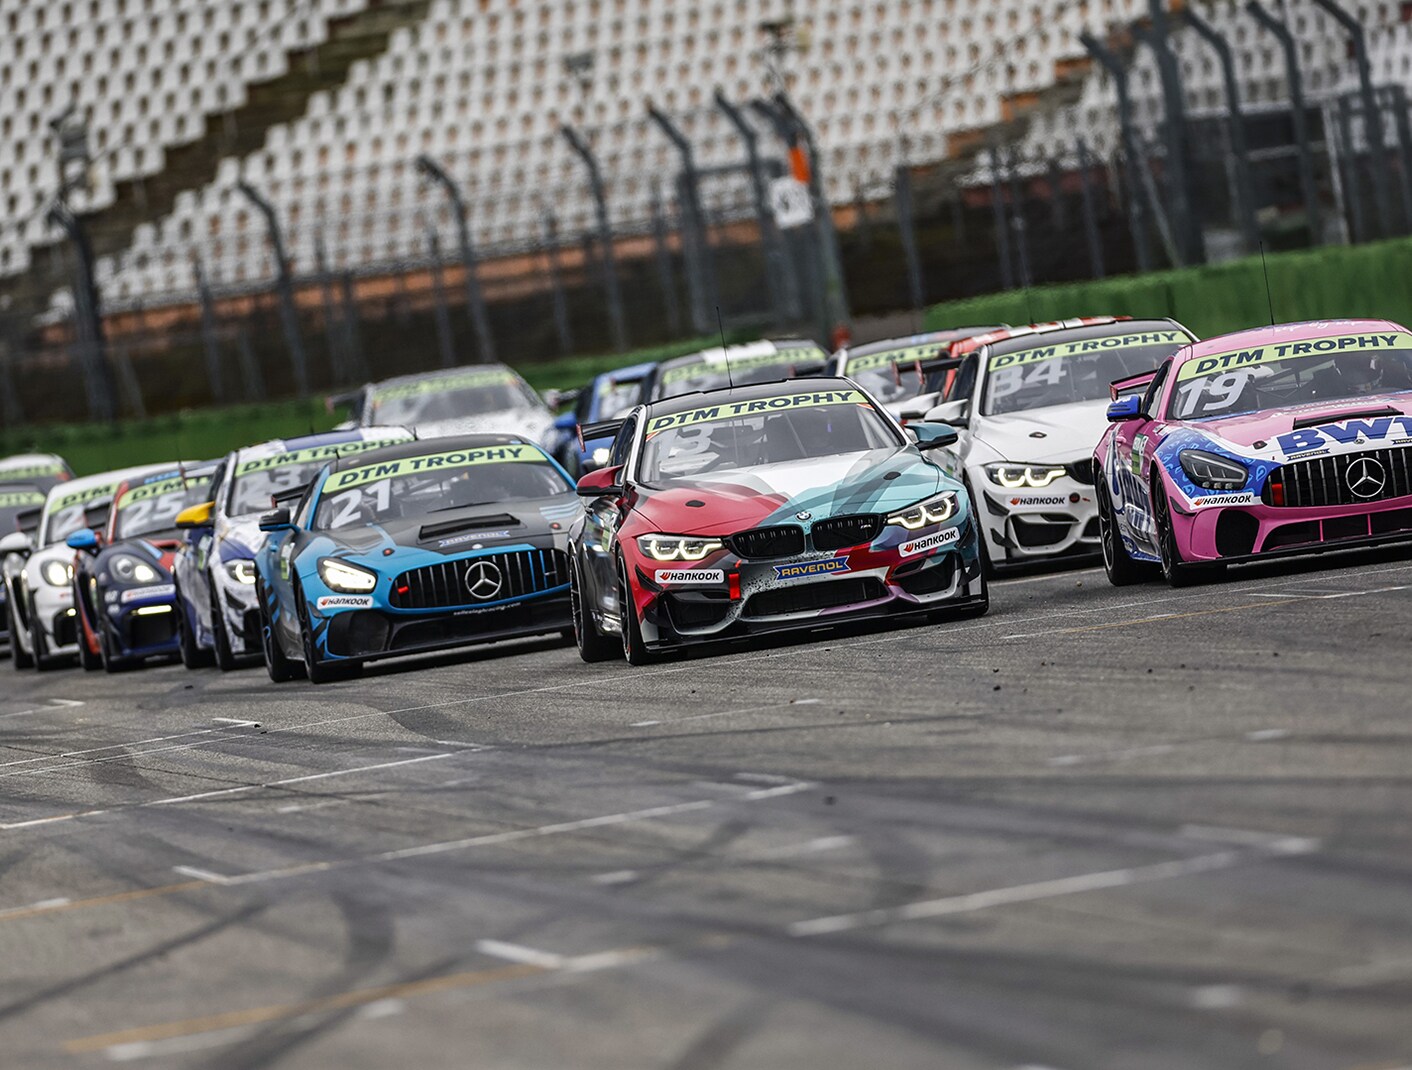 DTM Trophy kicks off the 2022 season on Hankook tires at the Lausitzring